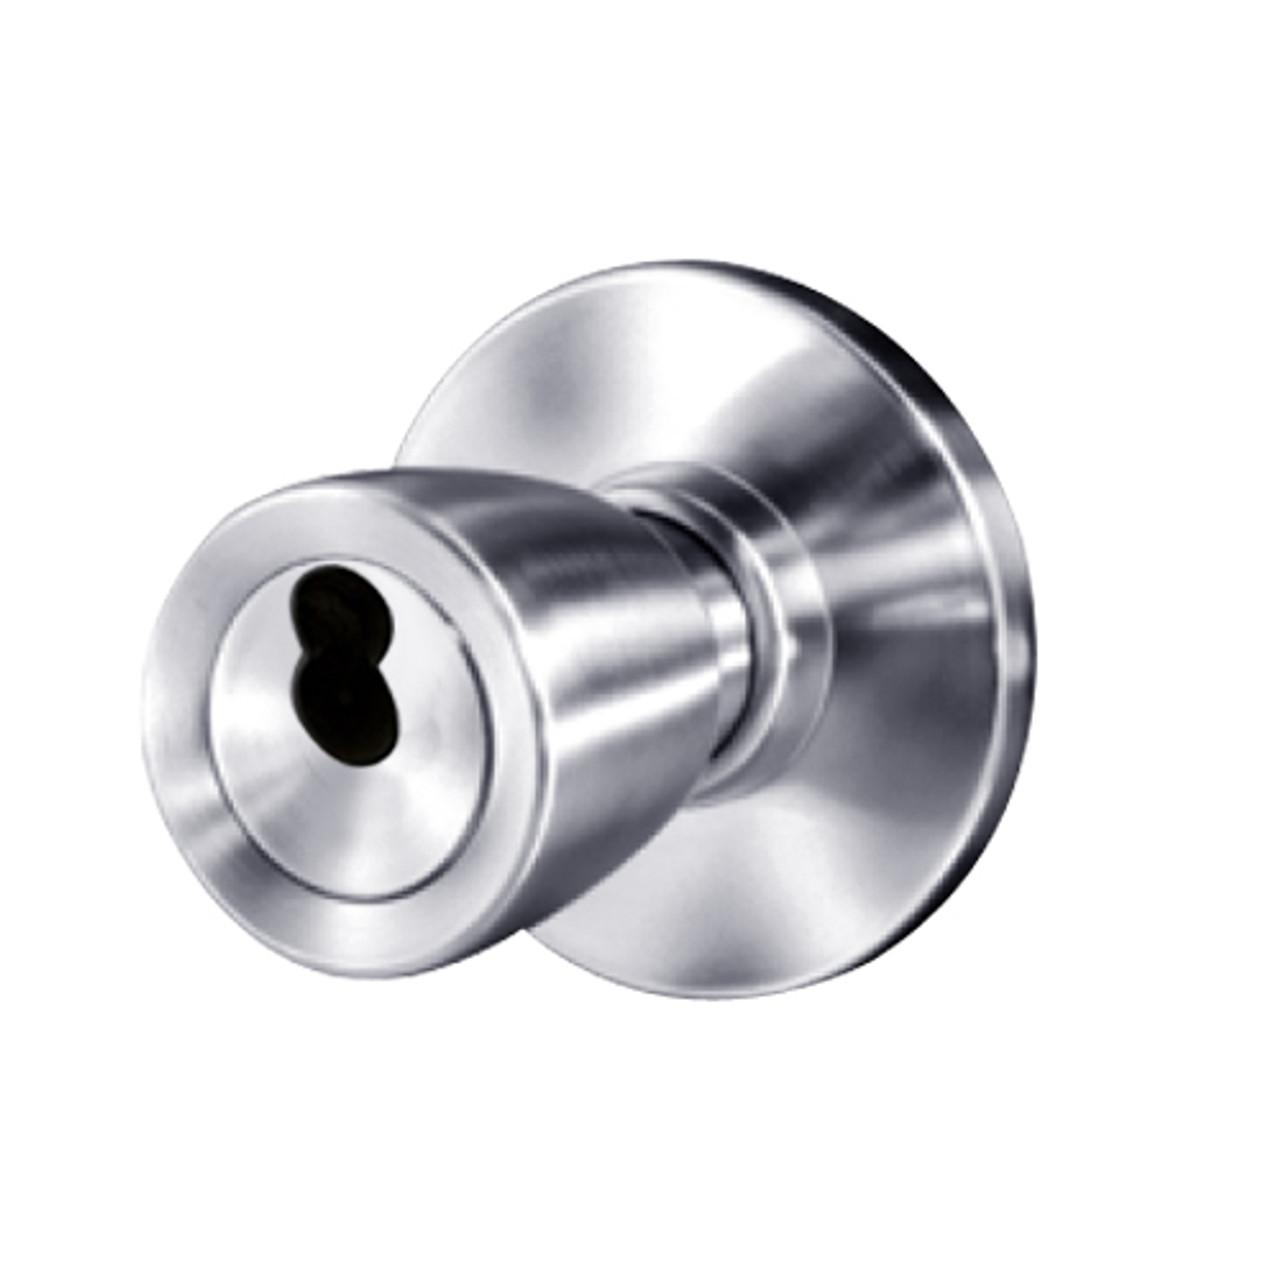 8K37XR6AS3626 Best 8K Series Special Heavy Duty Cylindrical Knob Locks with Tulip Style in Satin Chrome